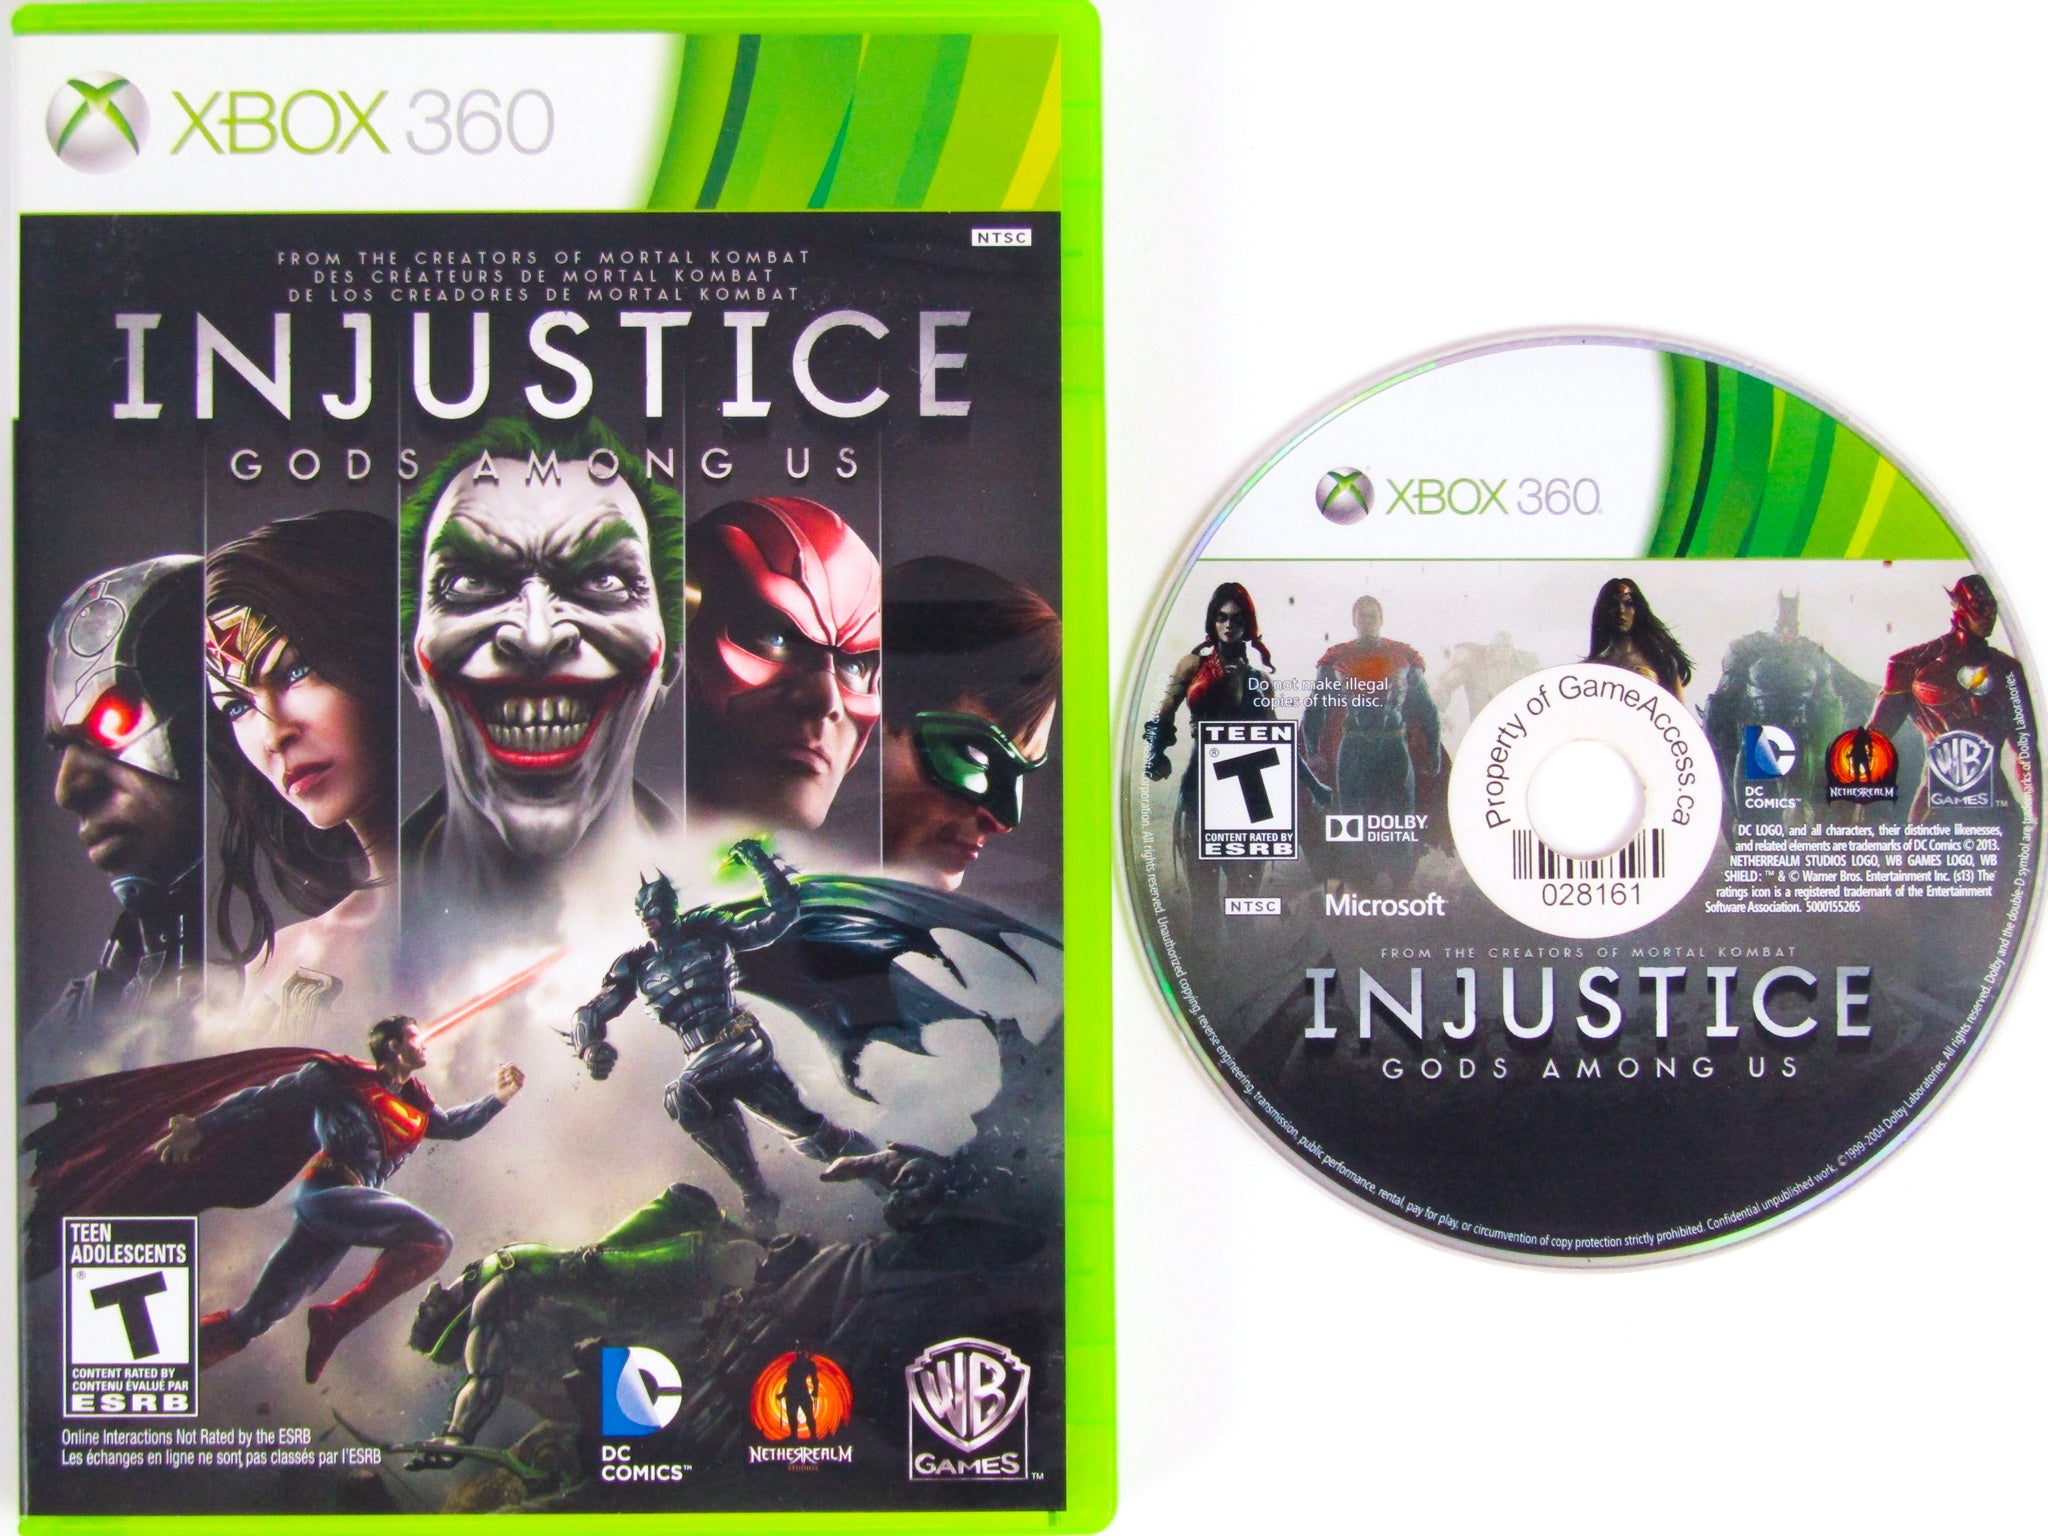 Injustice: Gods Among Us (video game, Xbox 360, 2013) reviews & ratings -  Glitchwave video games database